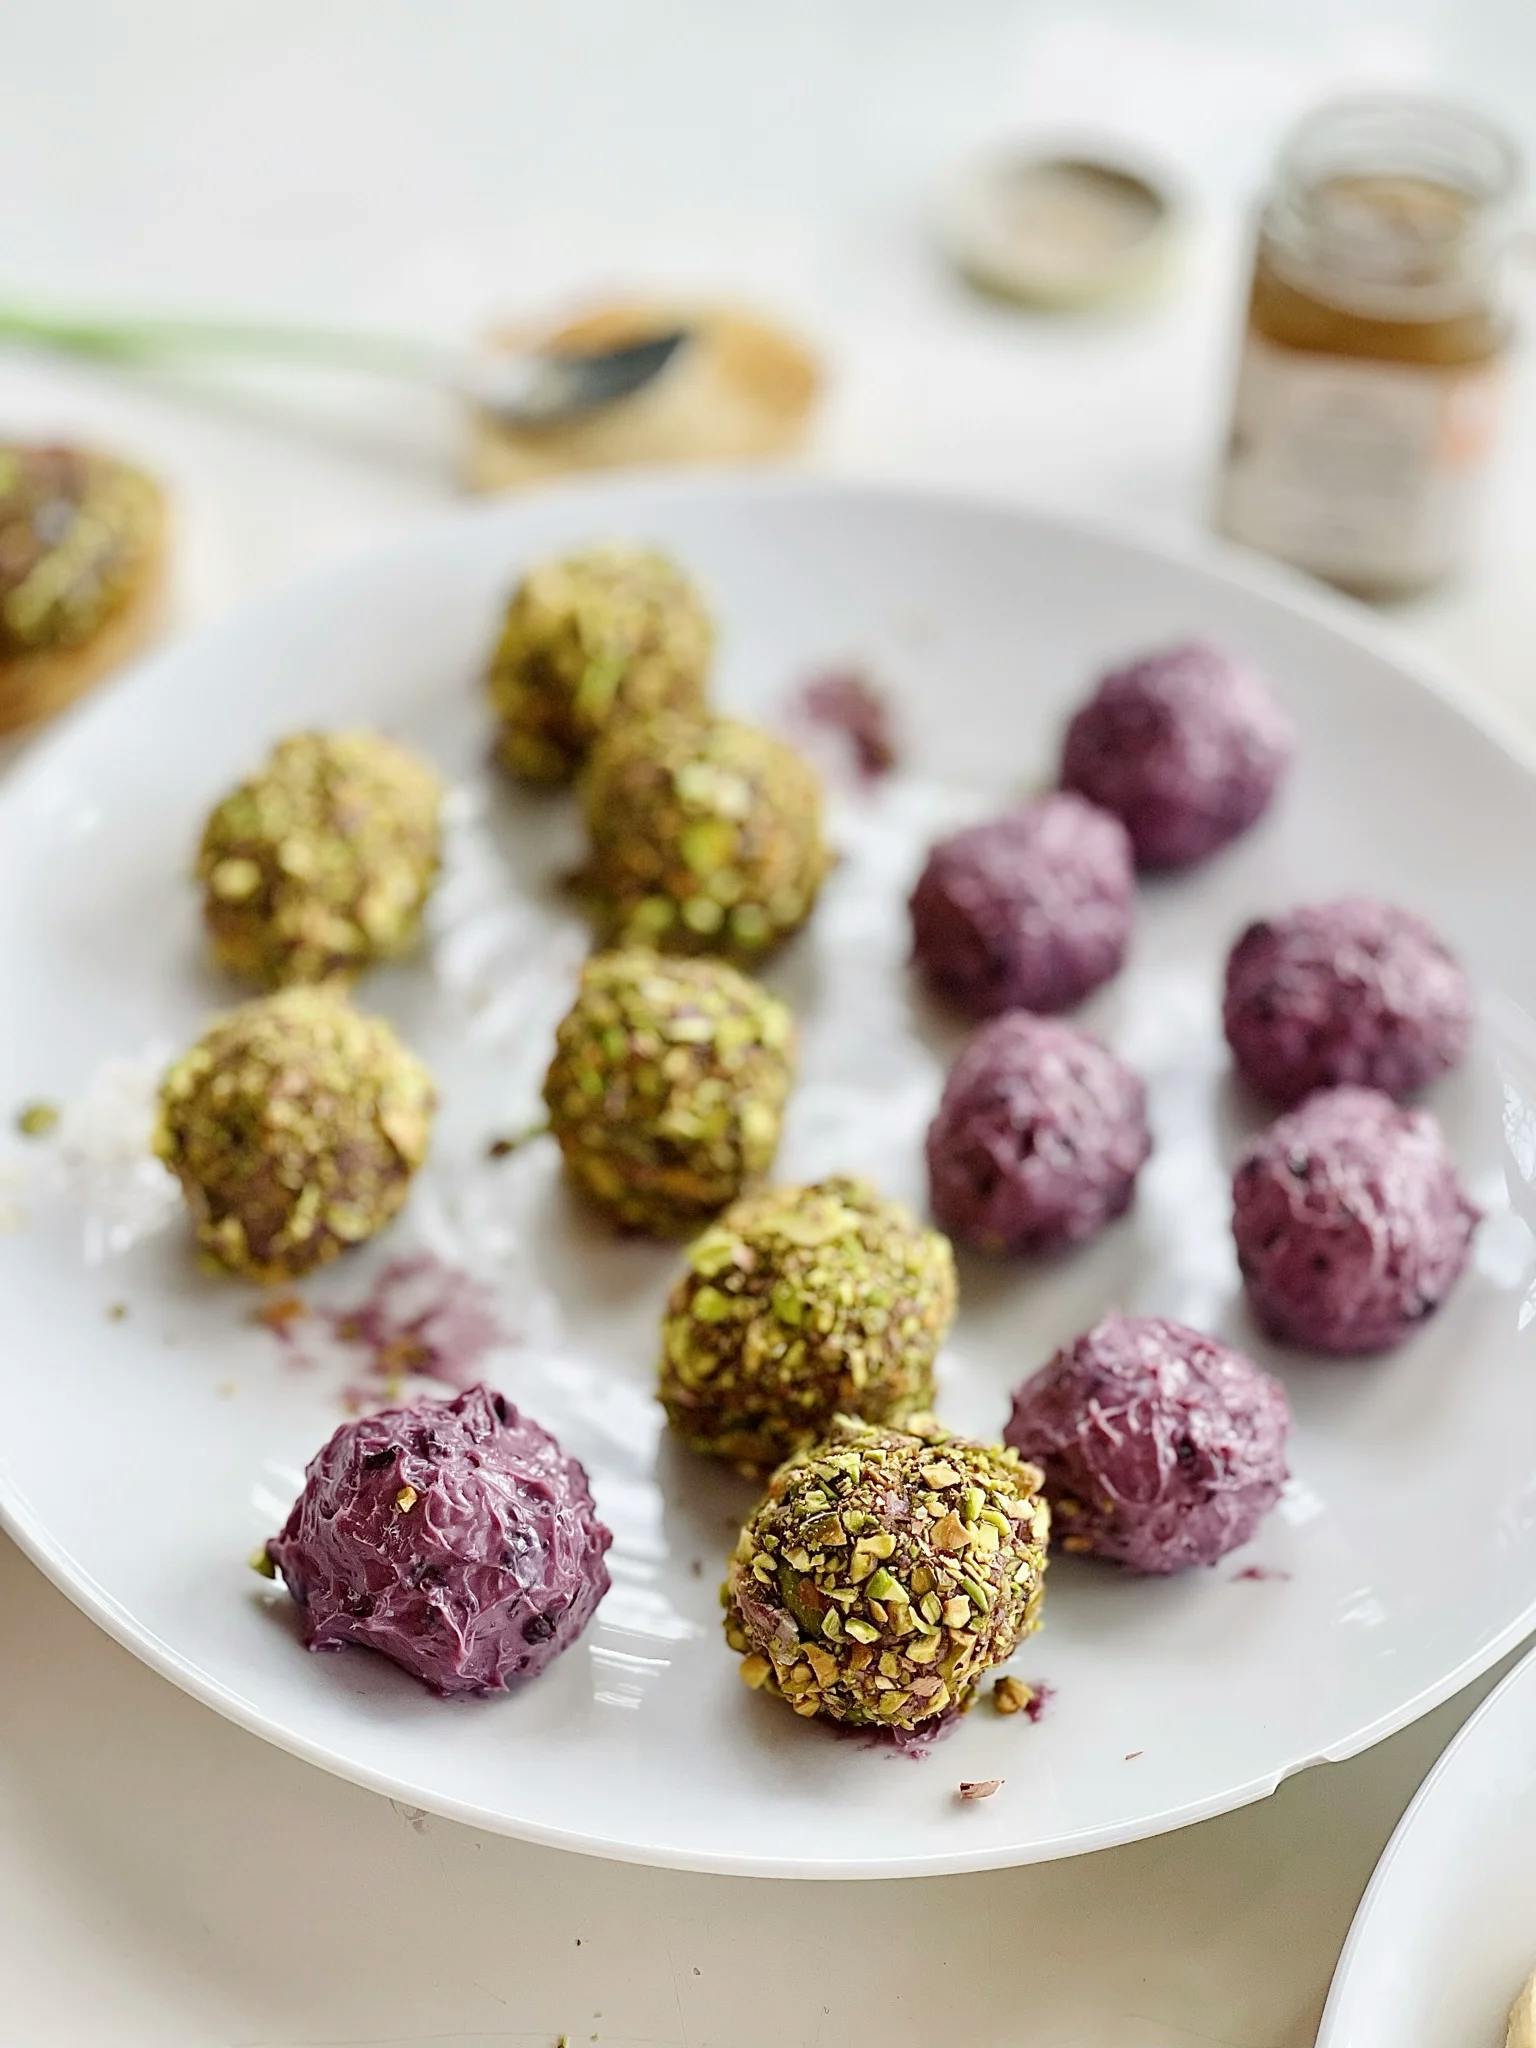 Picture for Marionberry-Blueberry Goat Cheese Balls